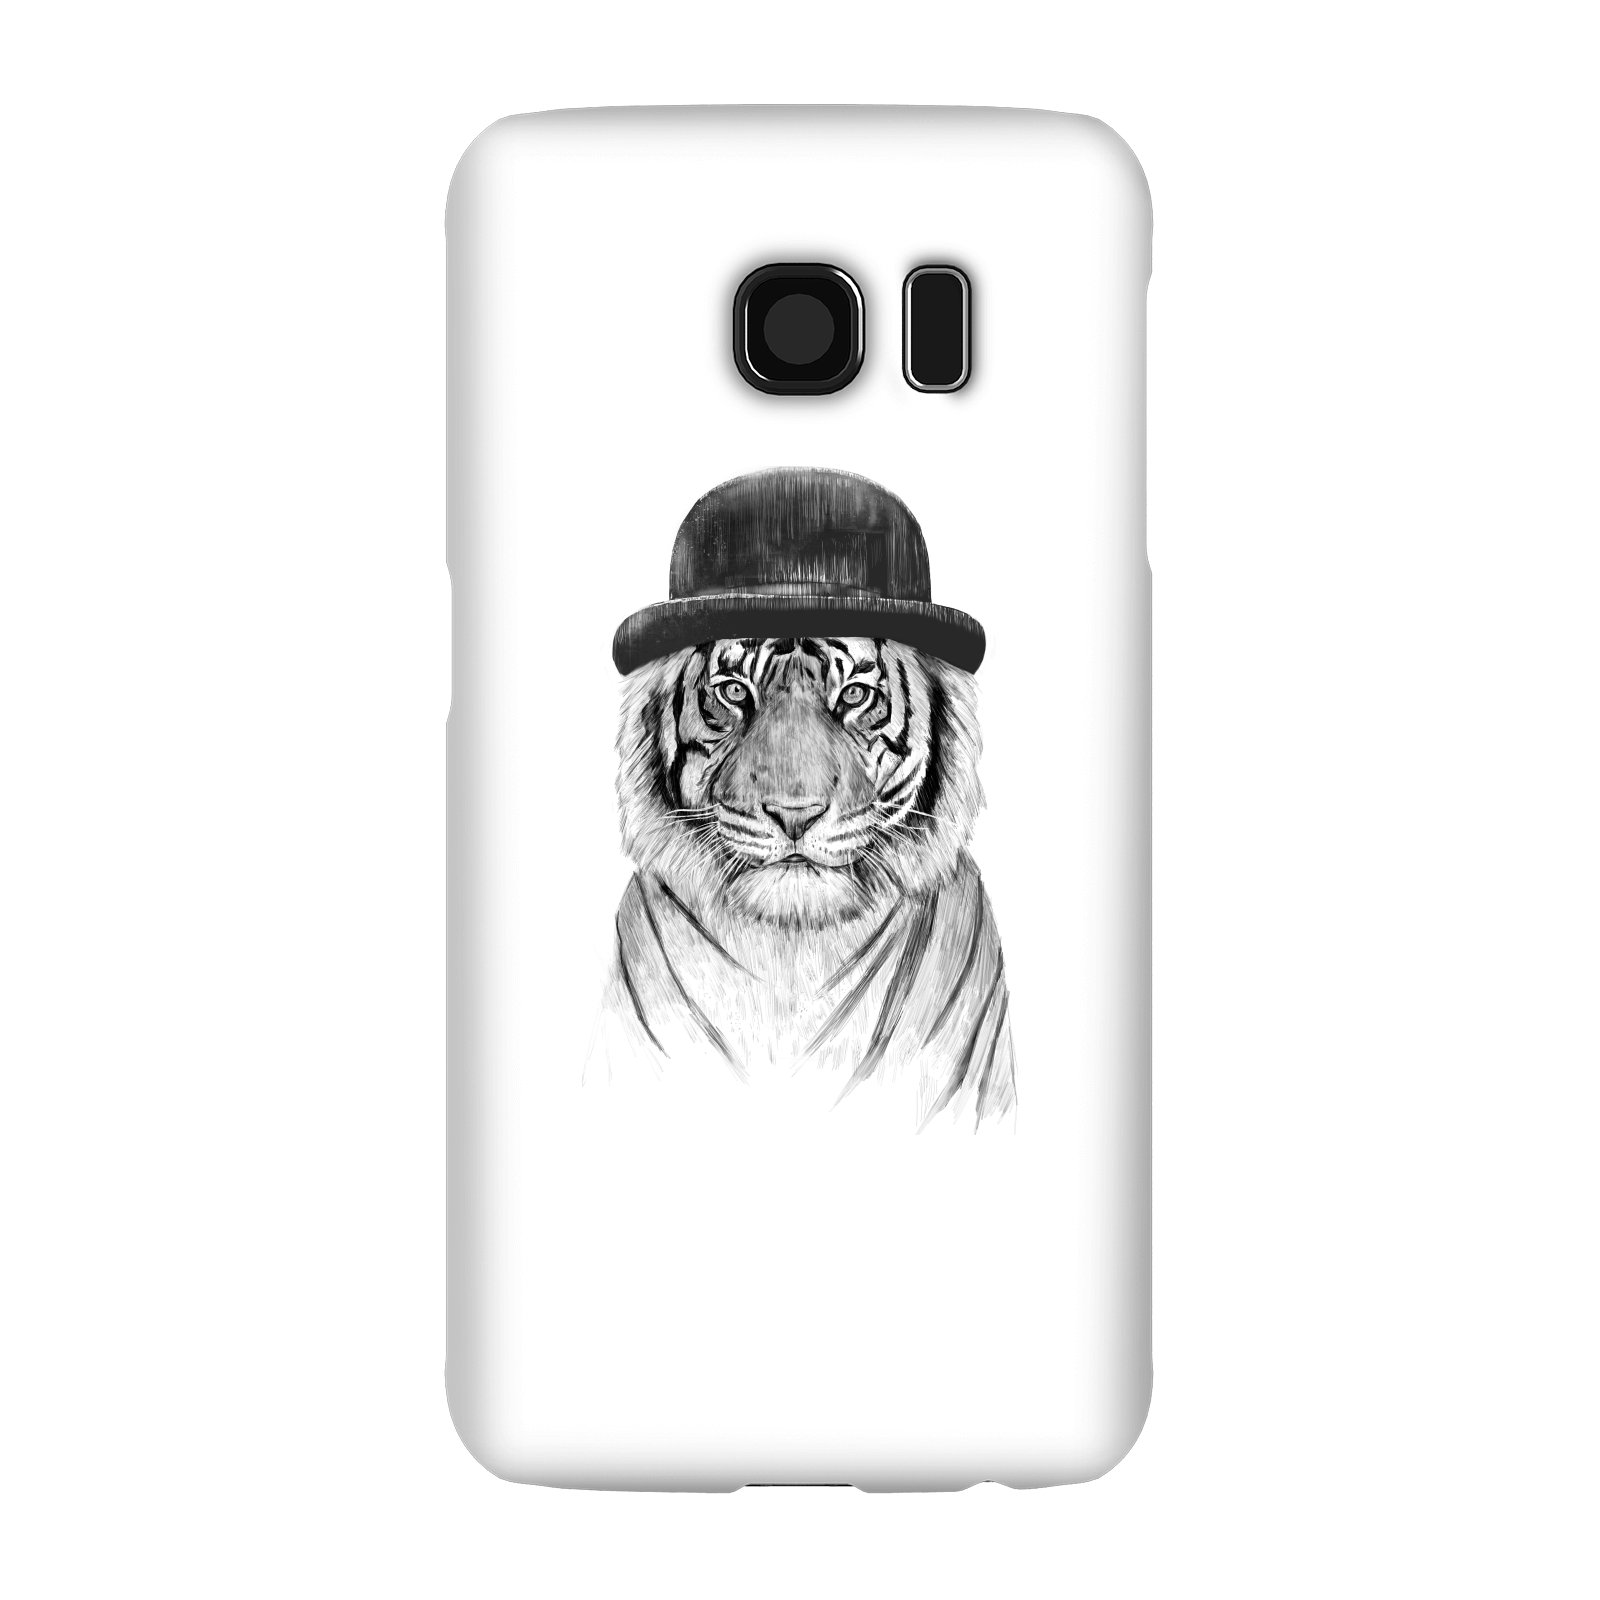 balazs solti tiger in a hat phone case for iphone and android - samsung s6 - snap case - matte